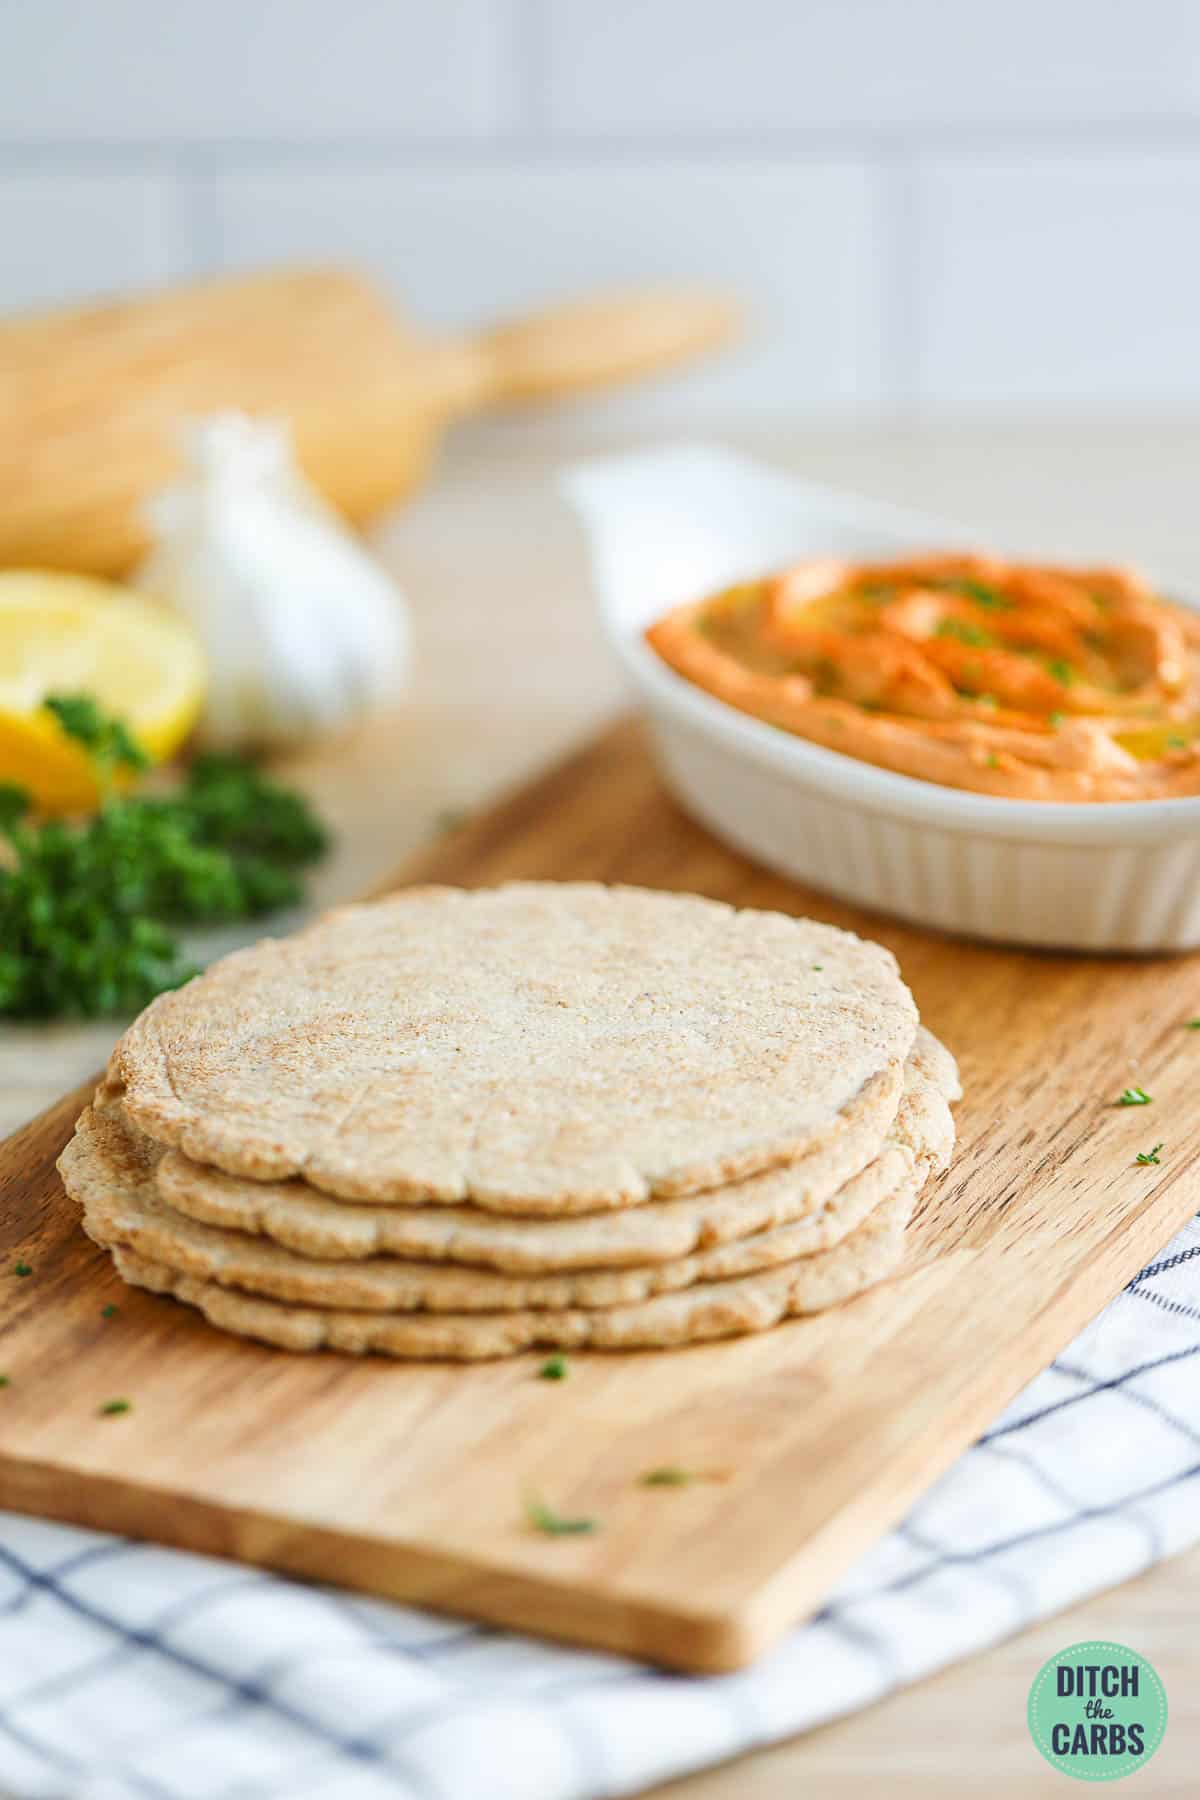 Low-carb pita bread baked and stacked on top of each other on a wooden tray. A dish of keto hummus is in the background.